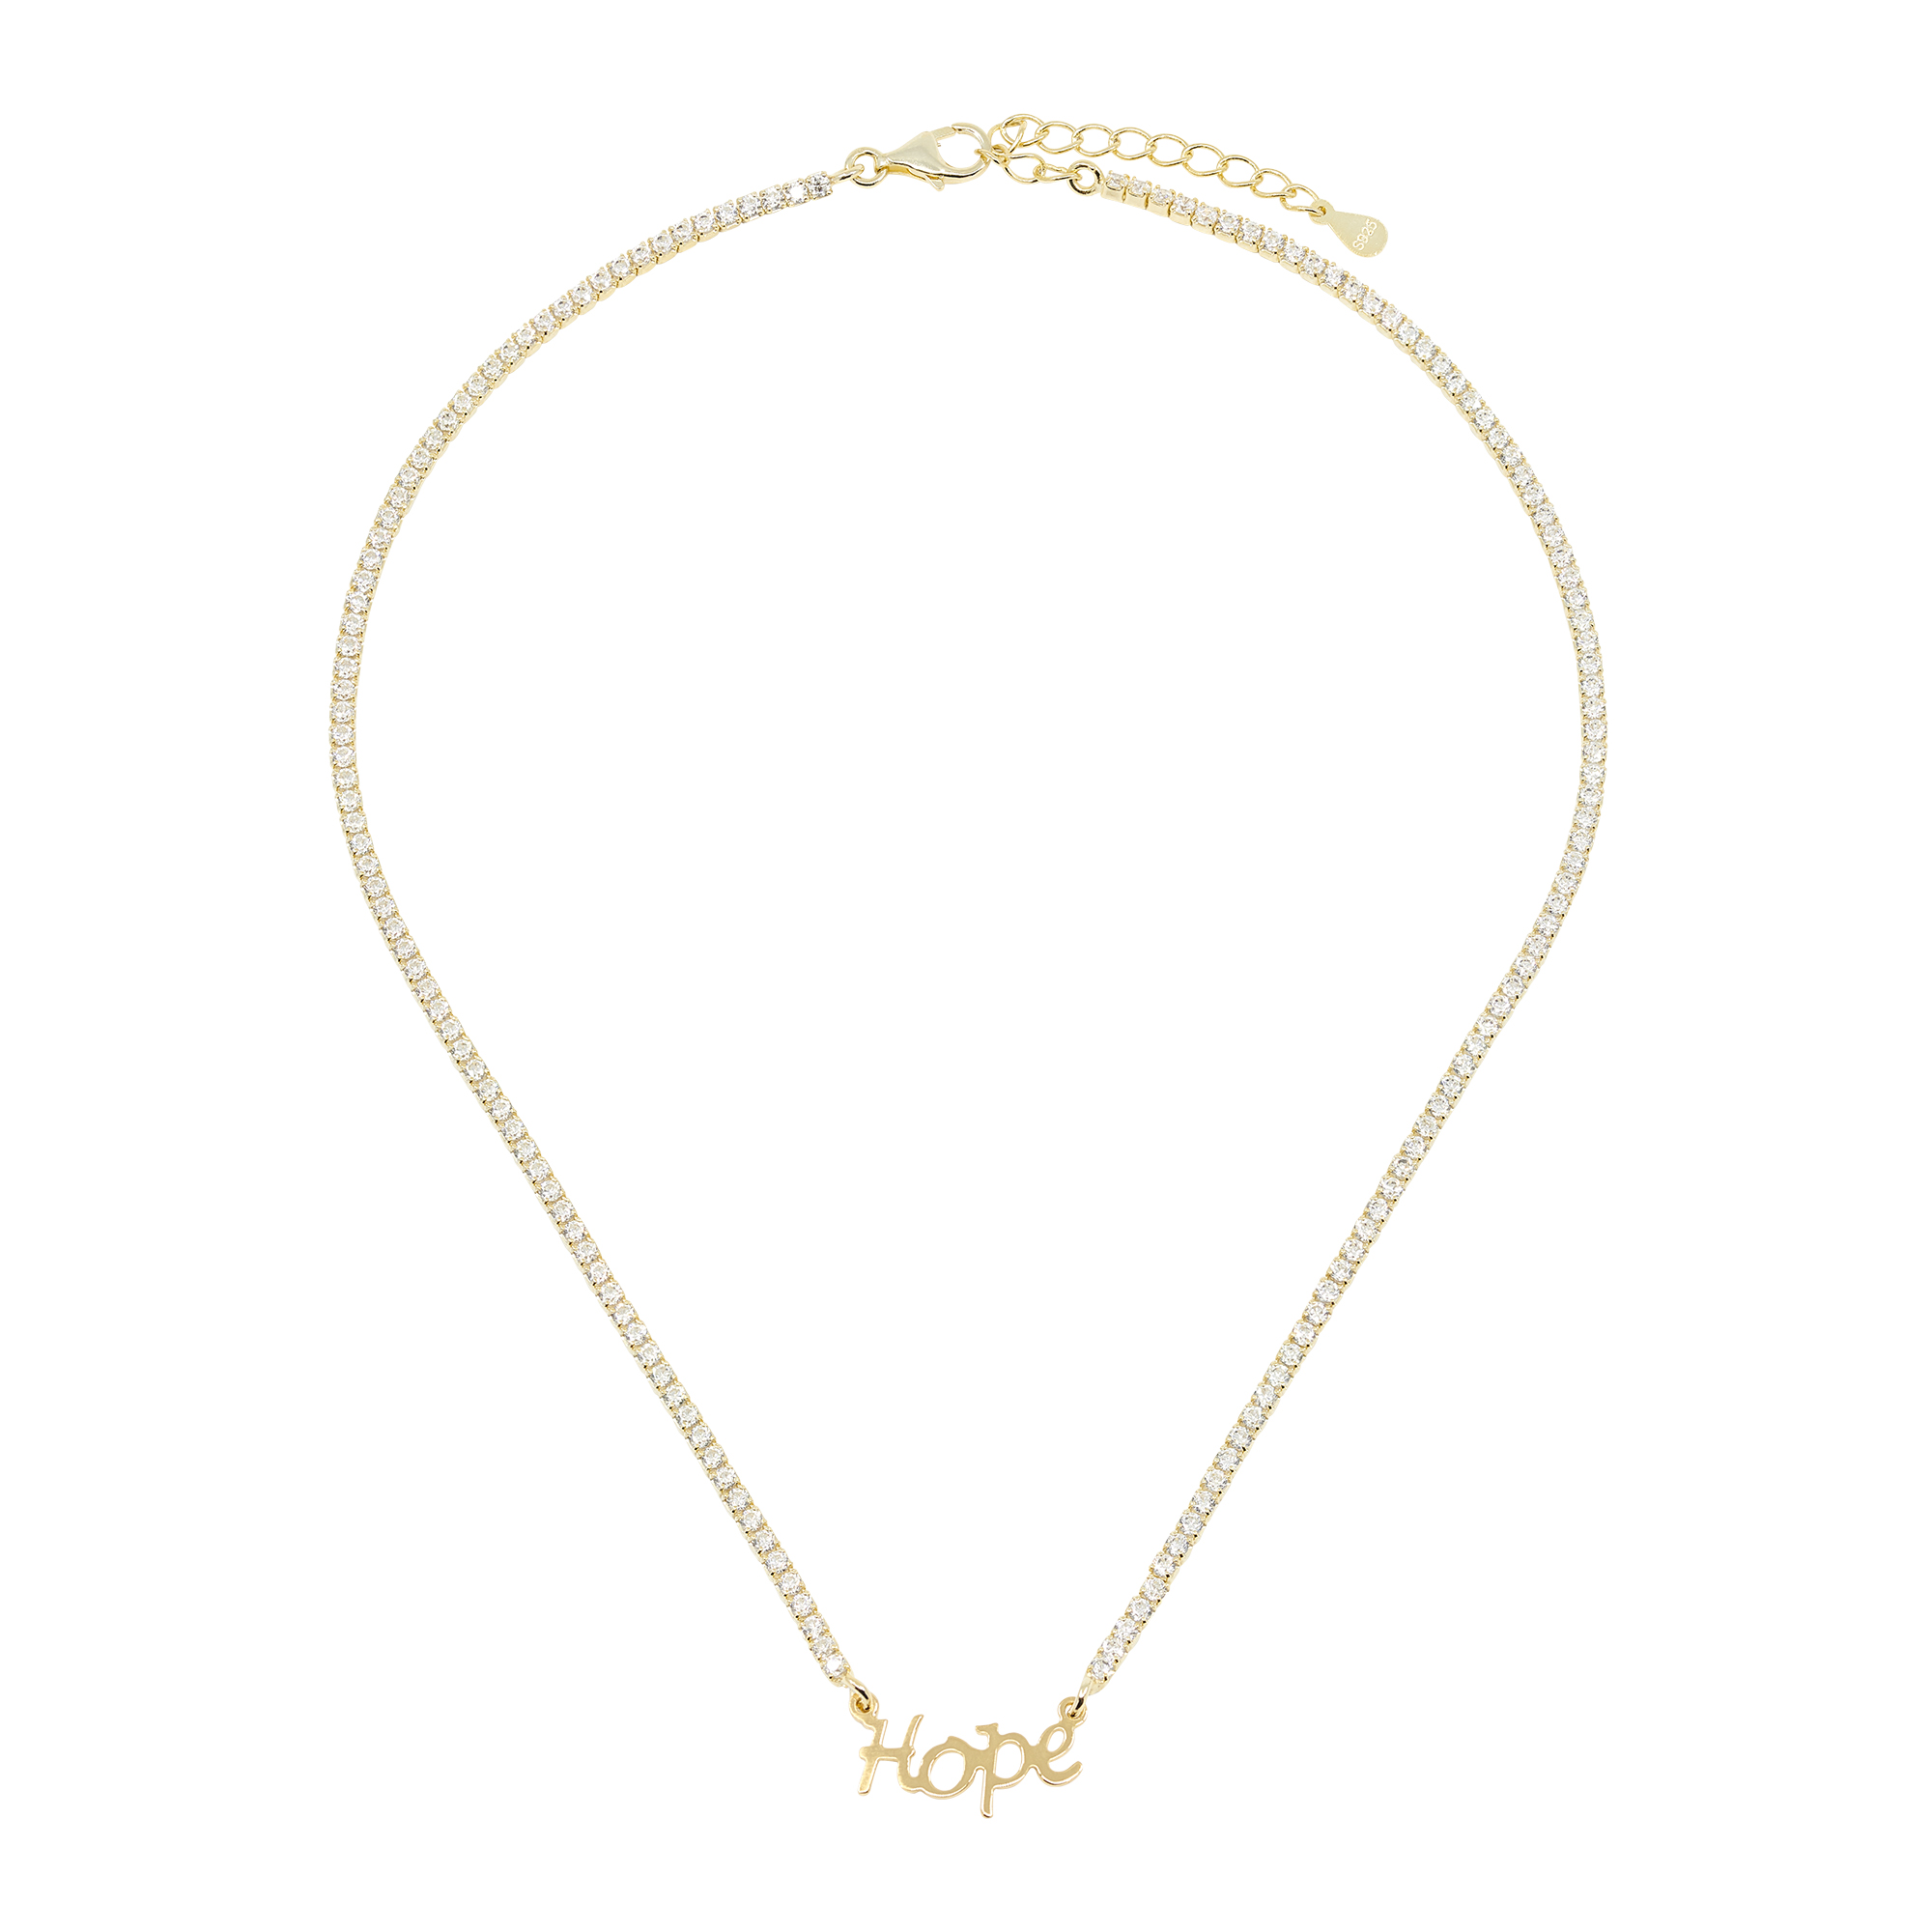 HOPE Tennis Necklace with White Crystals - MIA's Italy